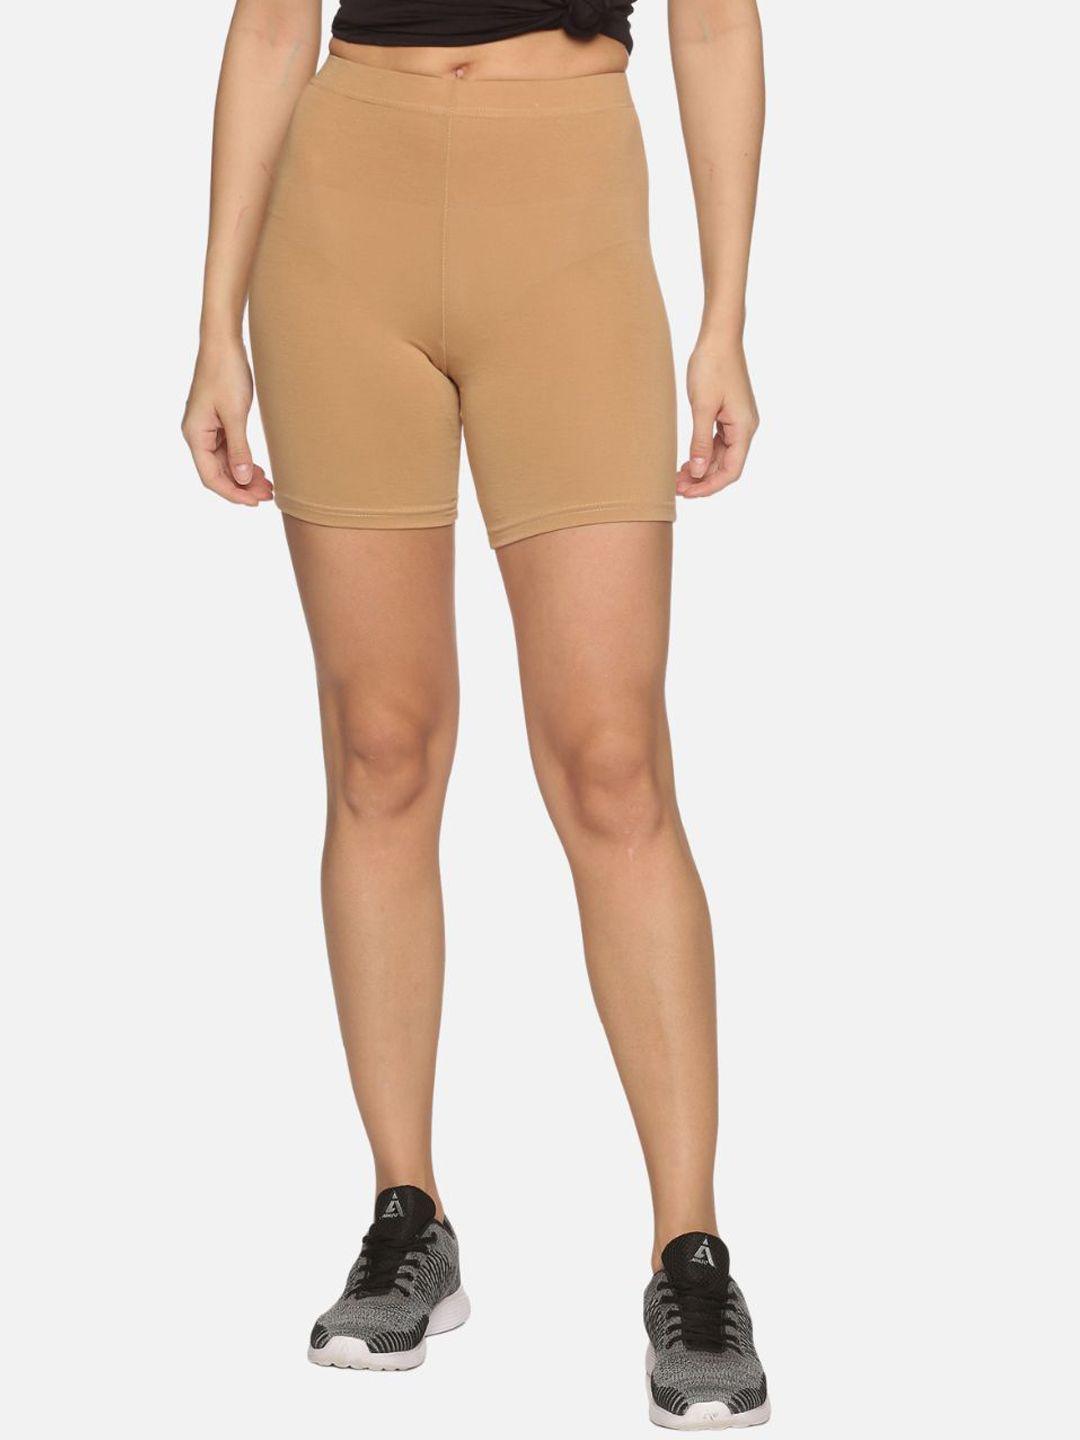 outflits-women-beige-skinny-fit-cycling-sports-shorts